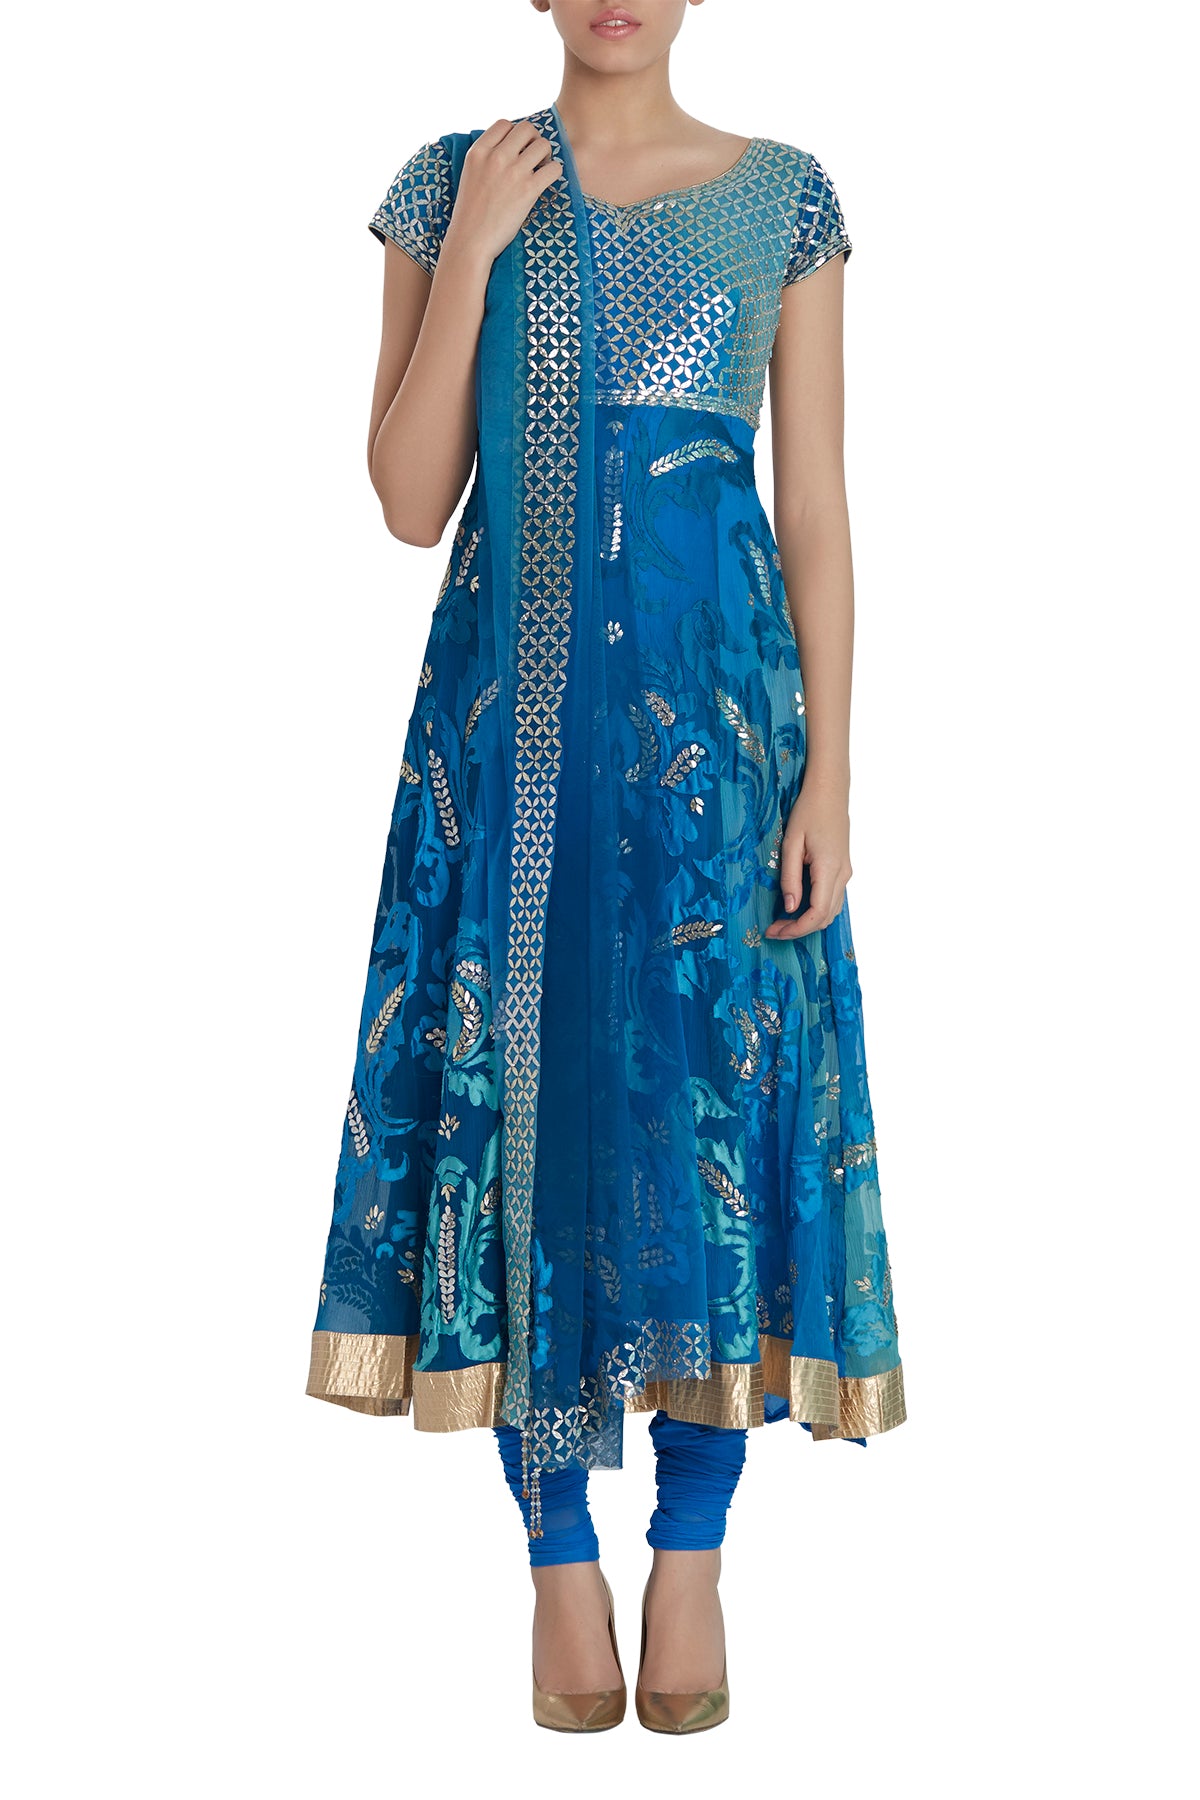 Right out of a reverie, this stunner of an outfit is seamless in its finish and flawless in its fashion-statement. In the hur of sky blue with light weight gota appliqu‚Äö√†√∂‚àö√¢¬¨¬®¬¨¬© embroidery, this one is paired with a sky blue churidar and dupatta.